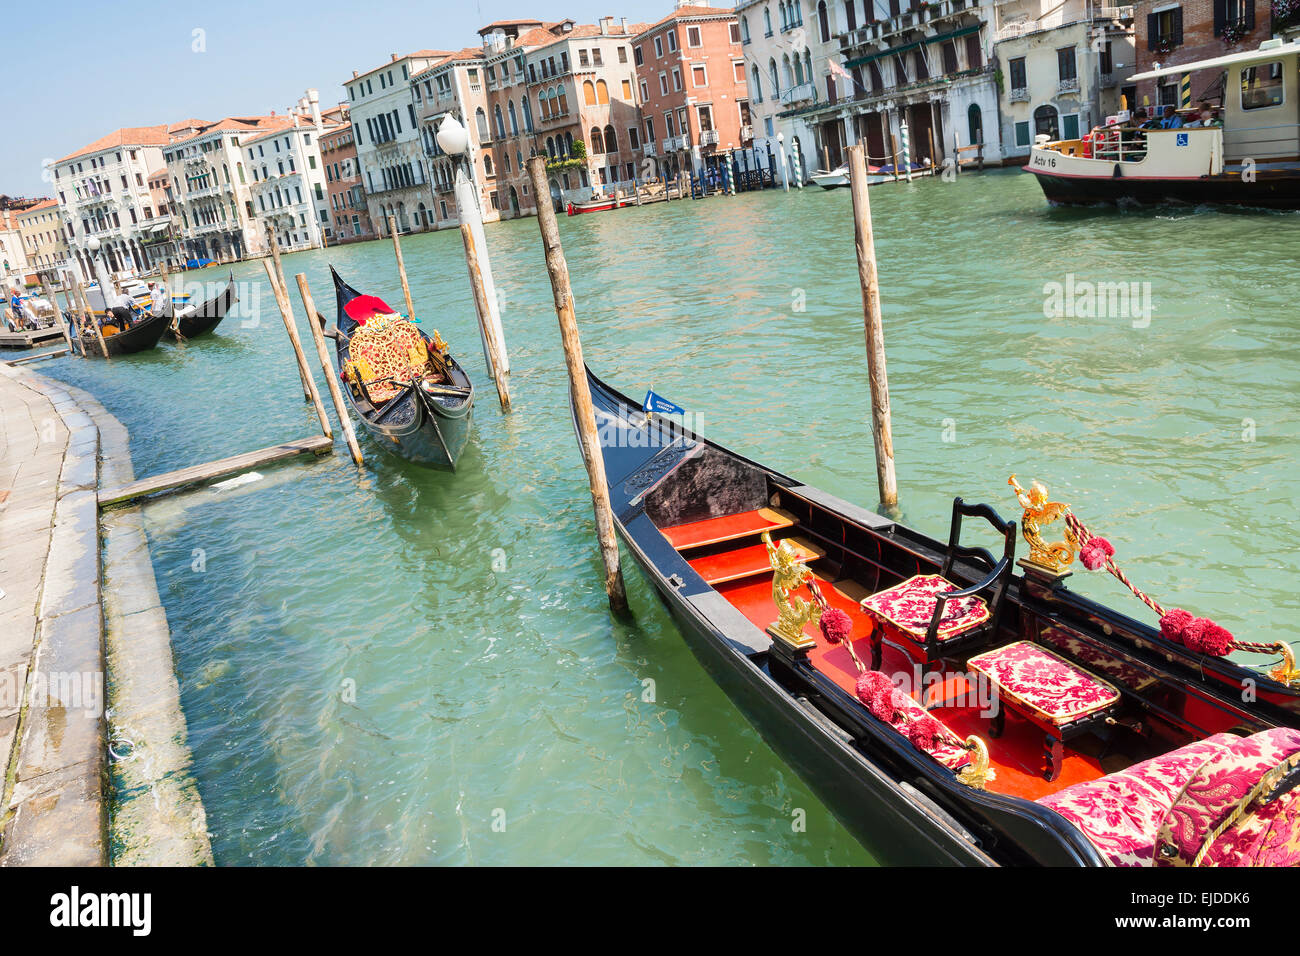 Venice,Italy-August 12,2014:Traditional venetian gondola await some tourists to carry around on a gondola in Venice During a sun Stock Photo